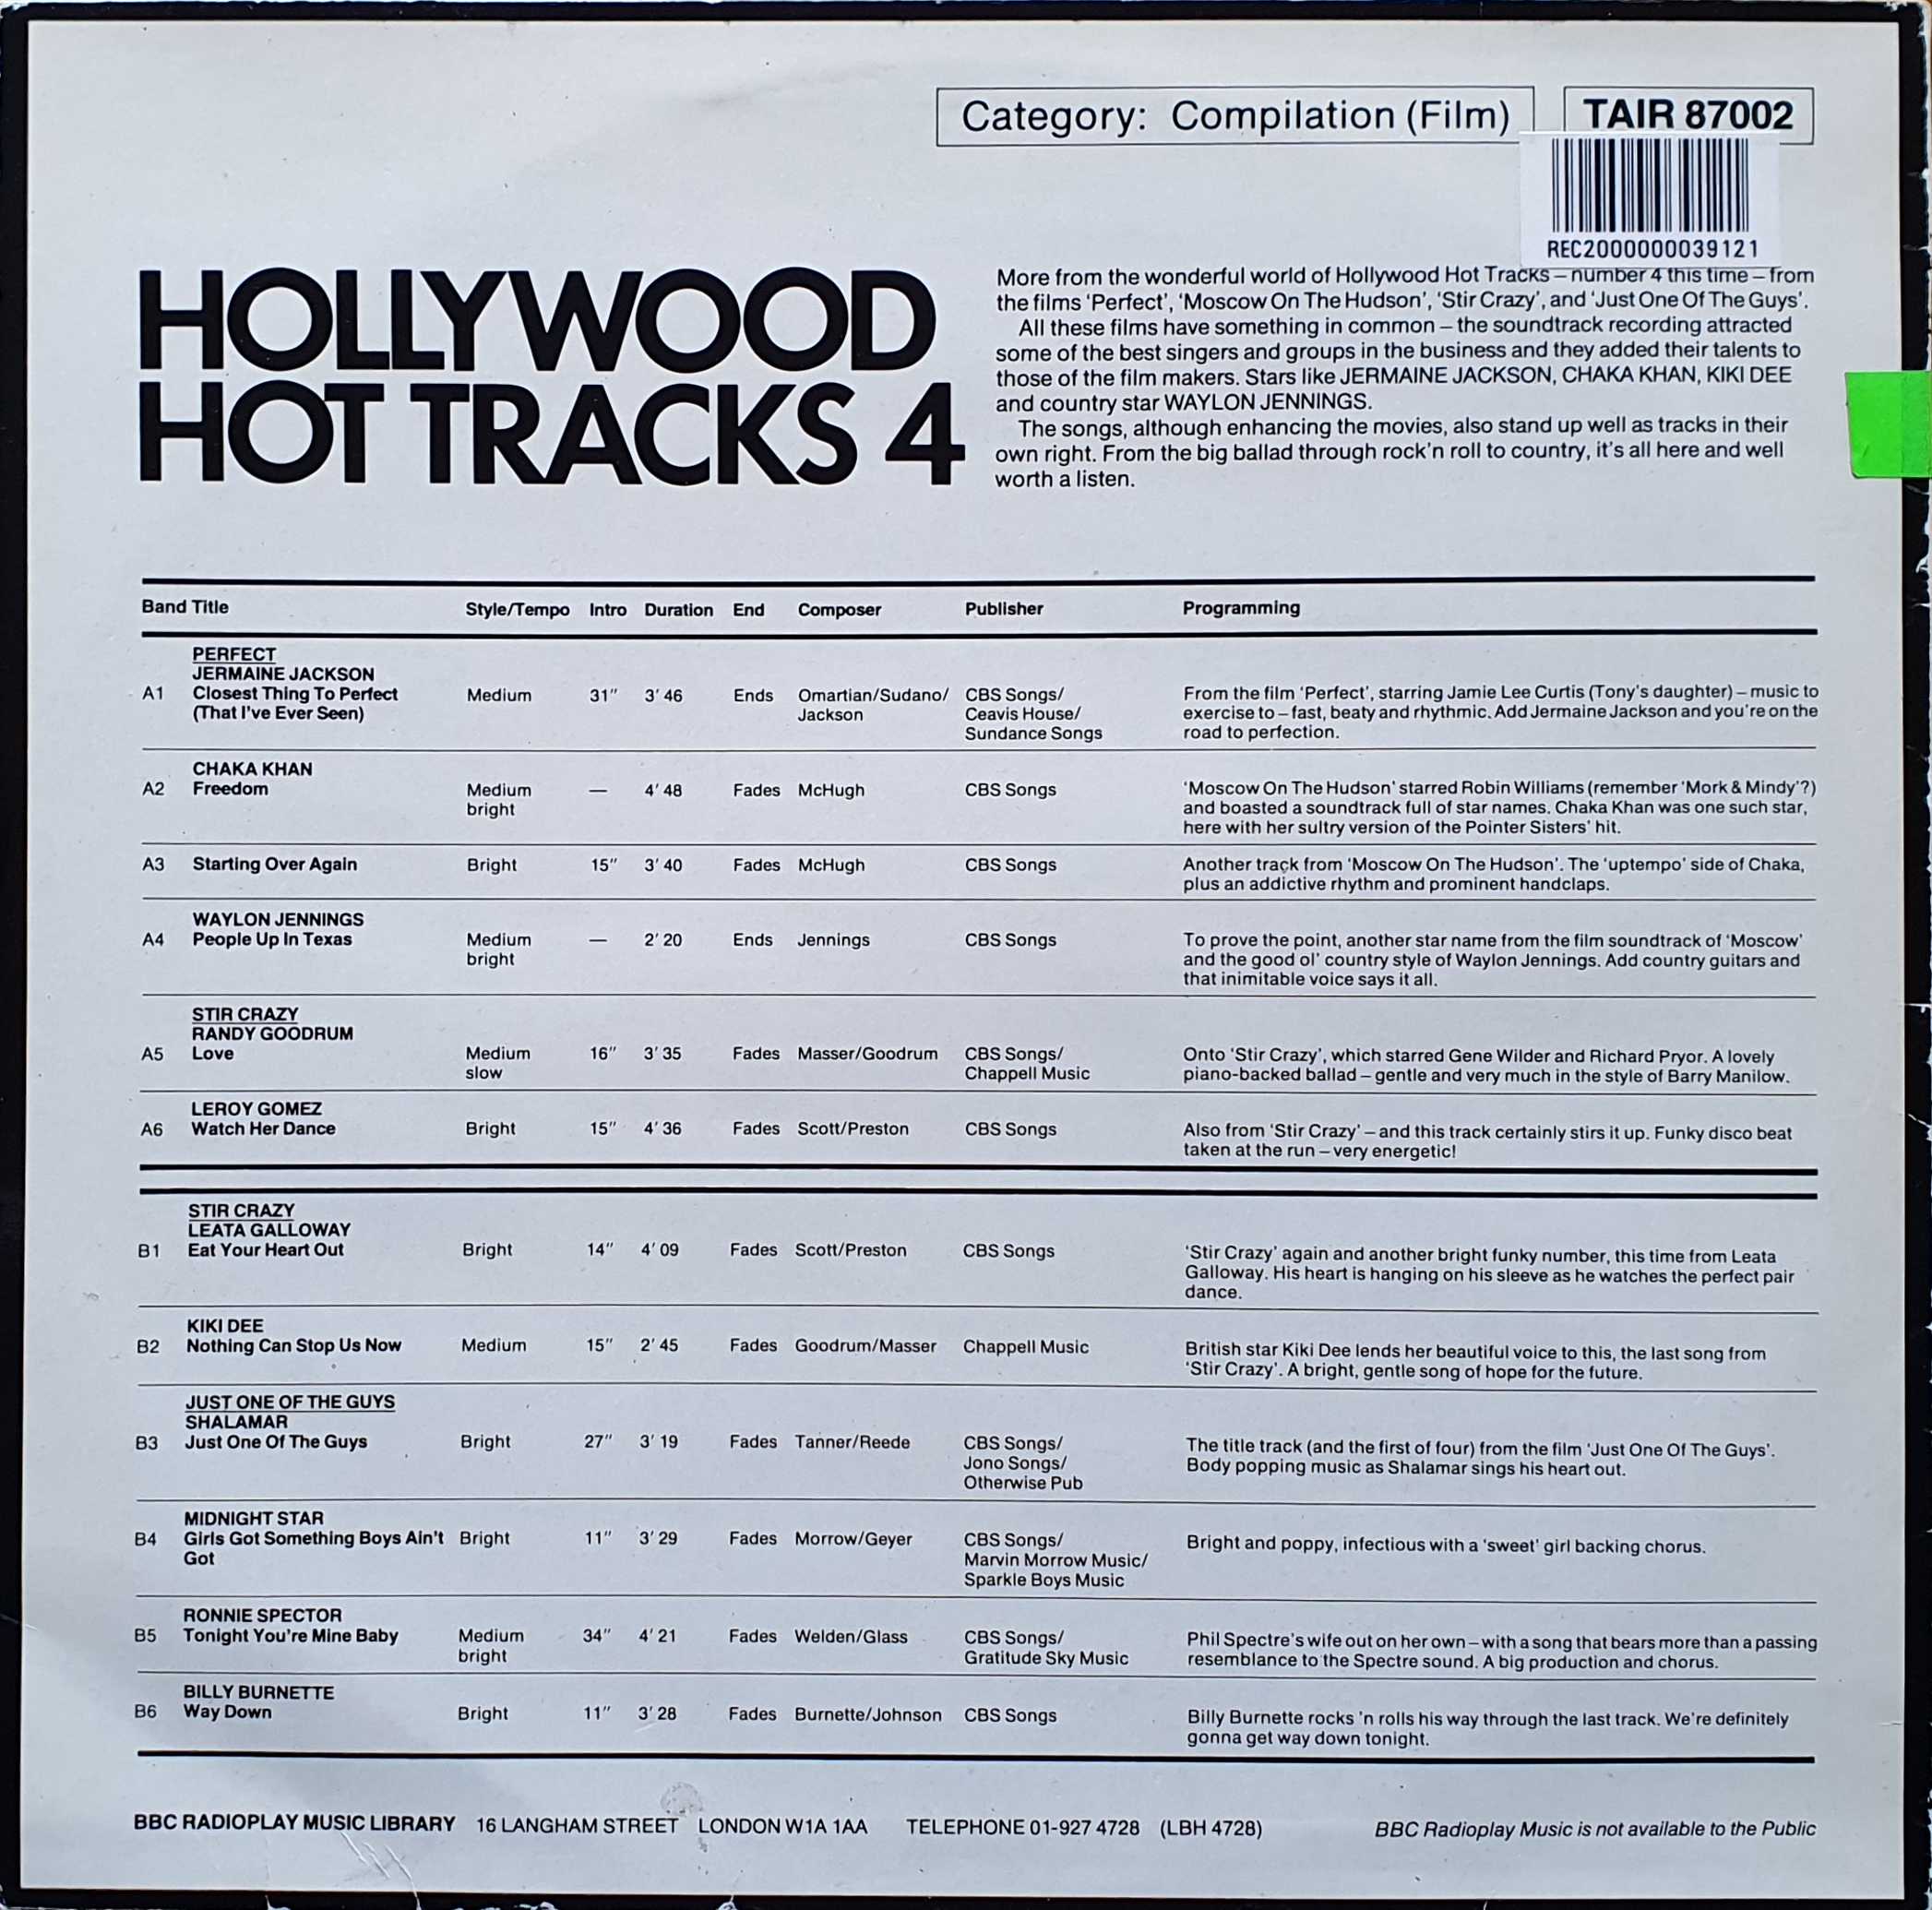 Picture of TAIR 87002 Hollywood hot tracks 4 by artist Various from the BBC records and Tapes library